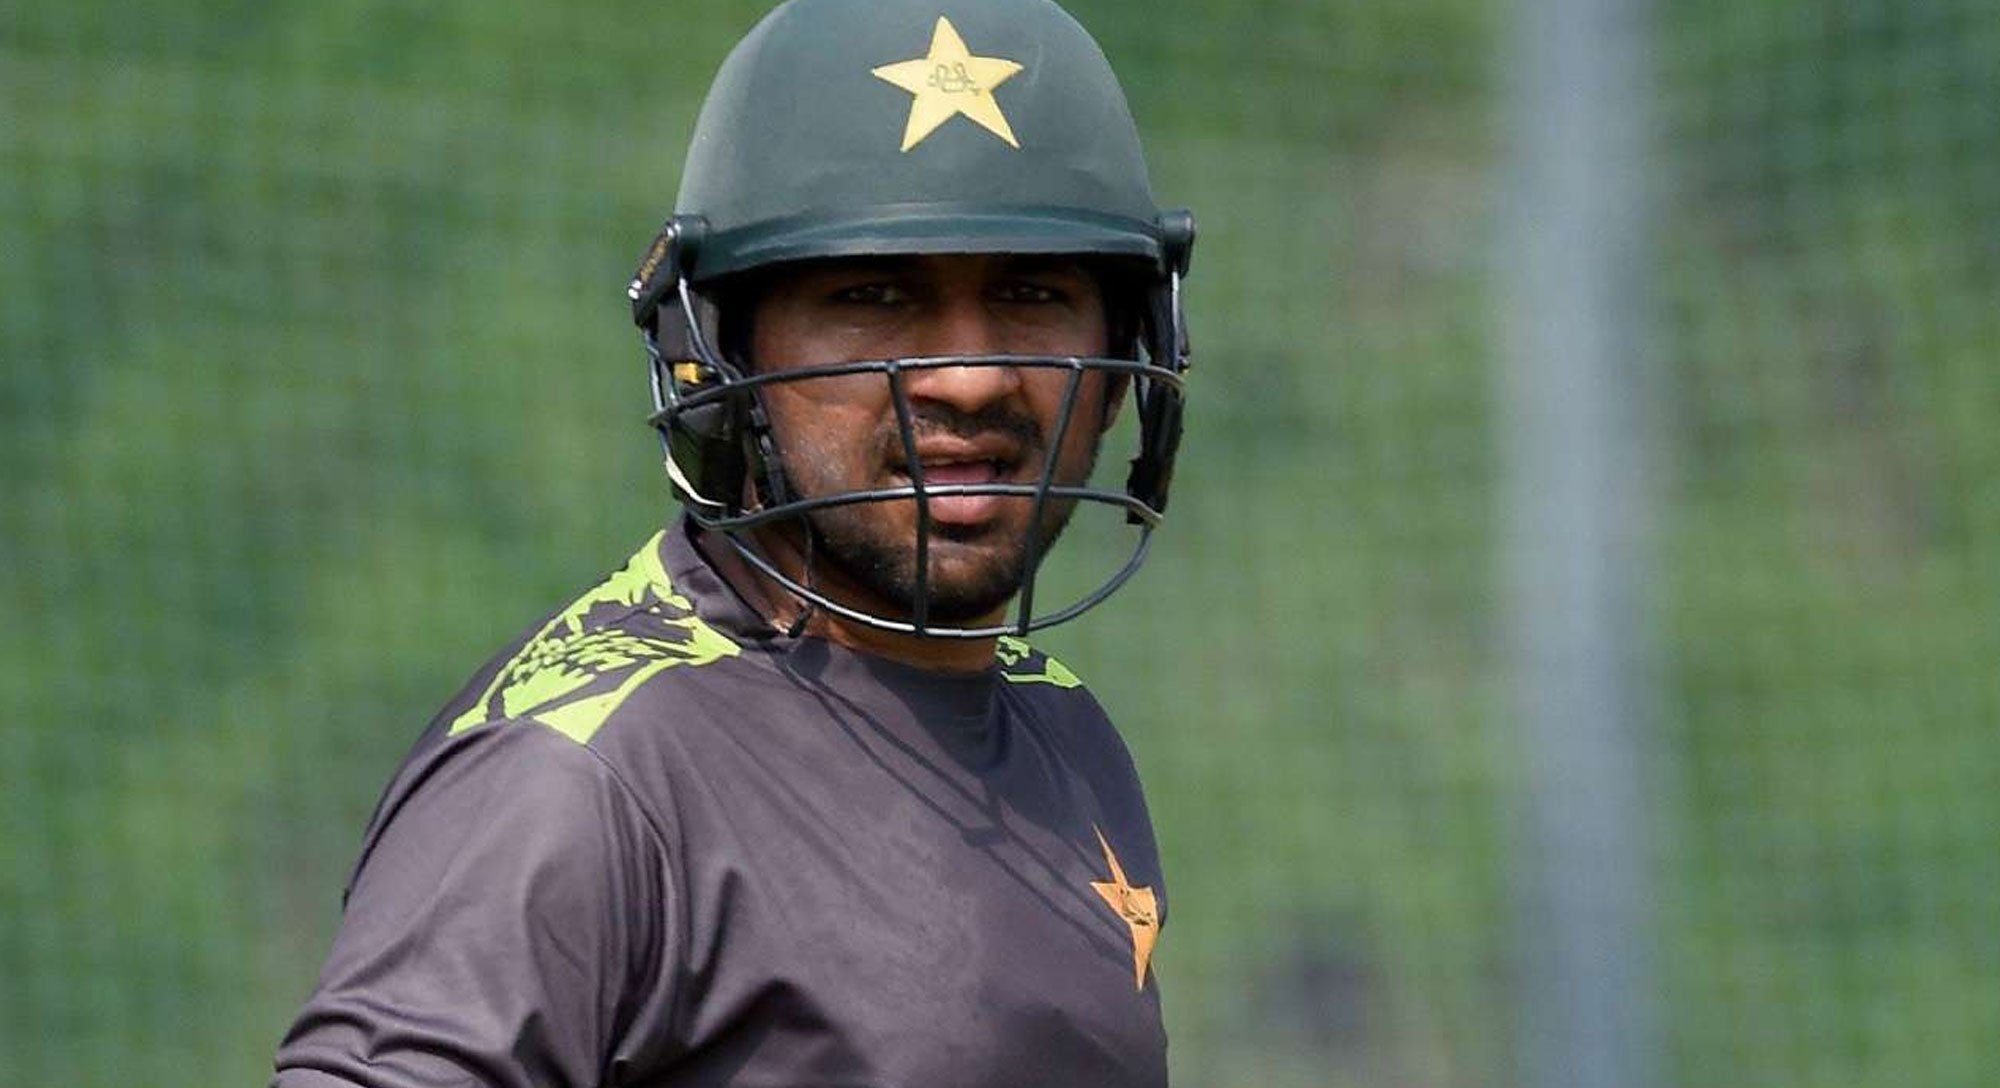 icc bans person who approached sarfaraz ahmed for fixing